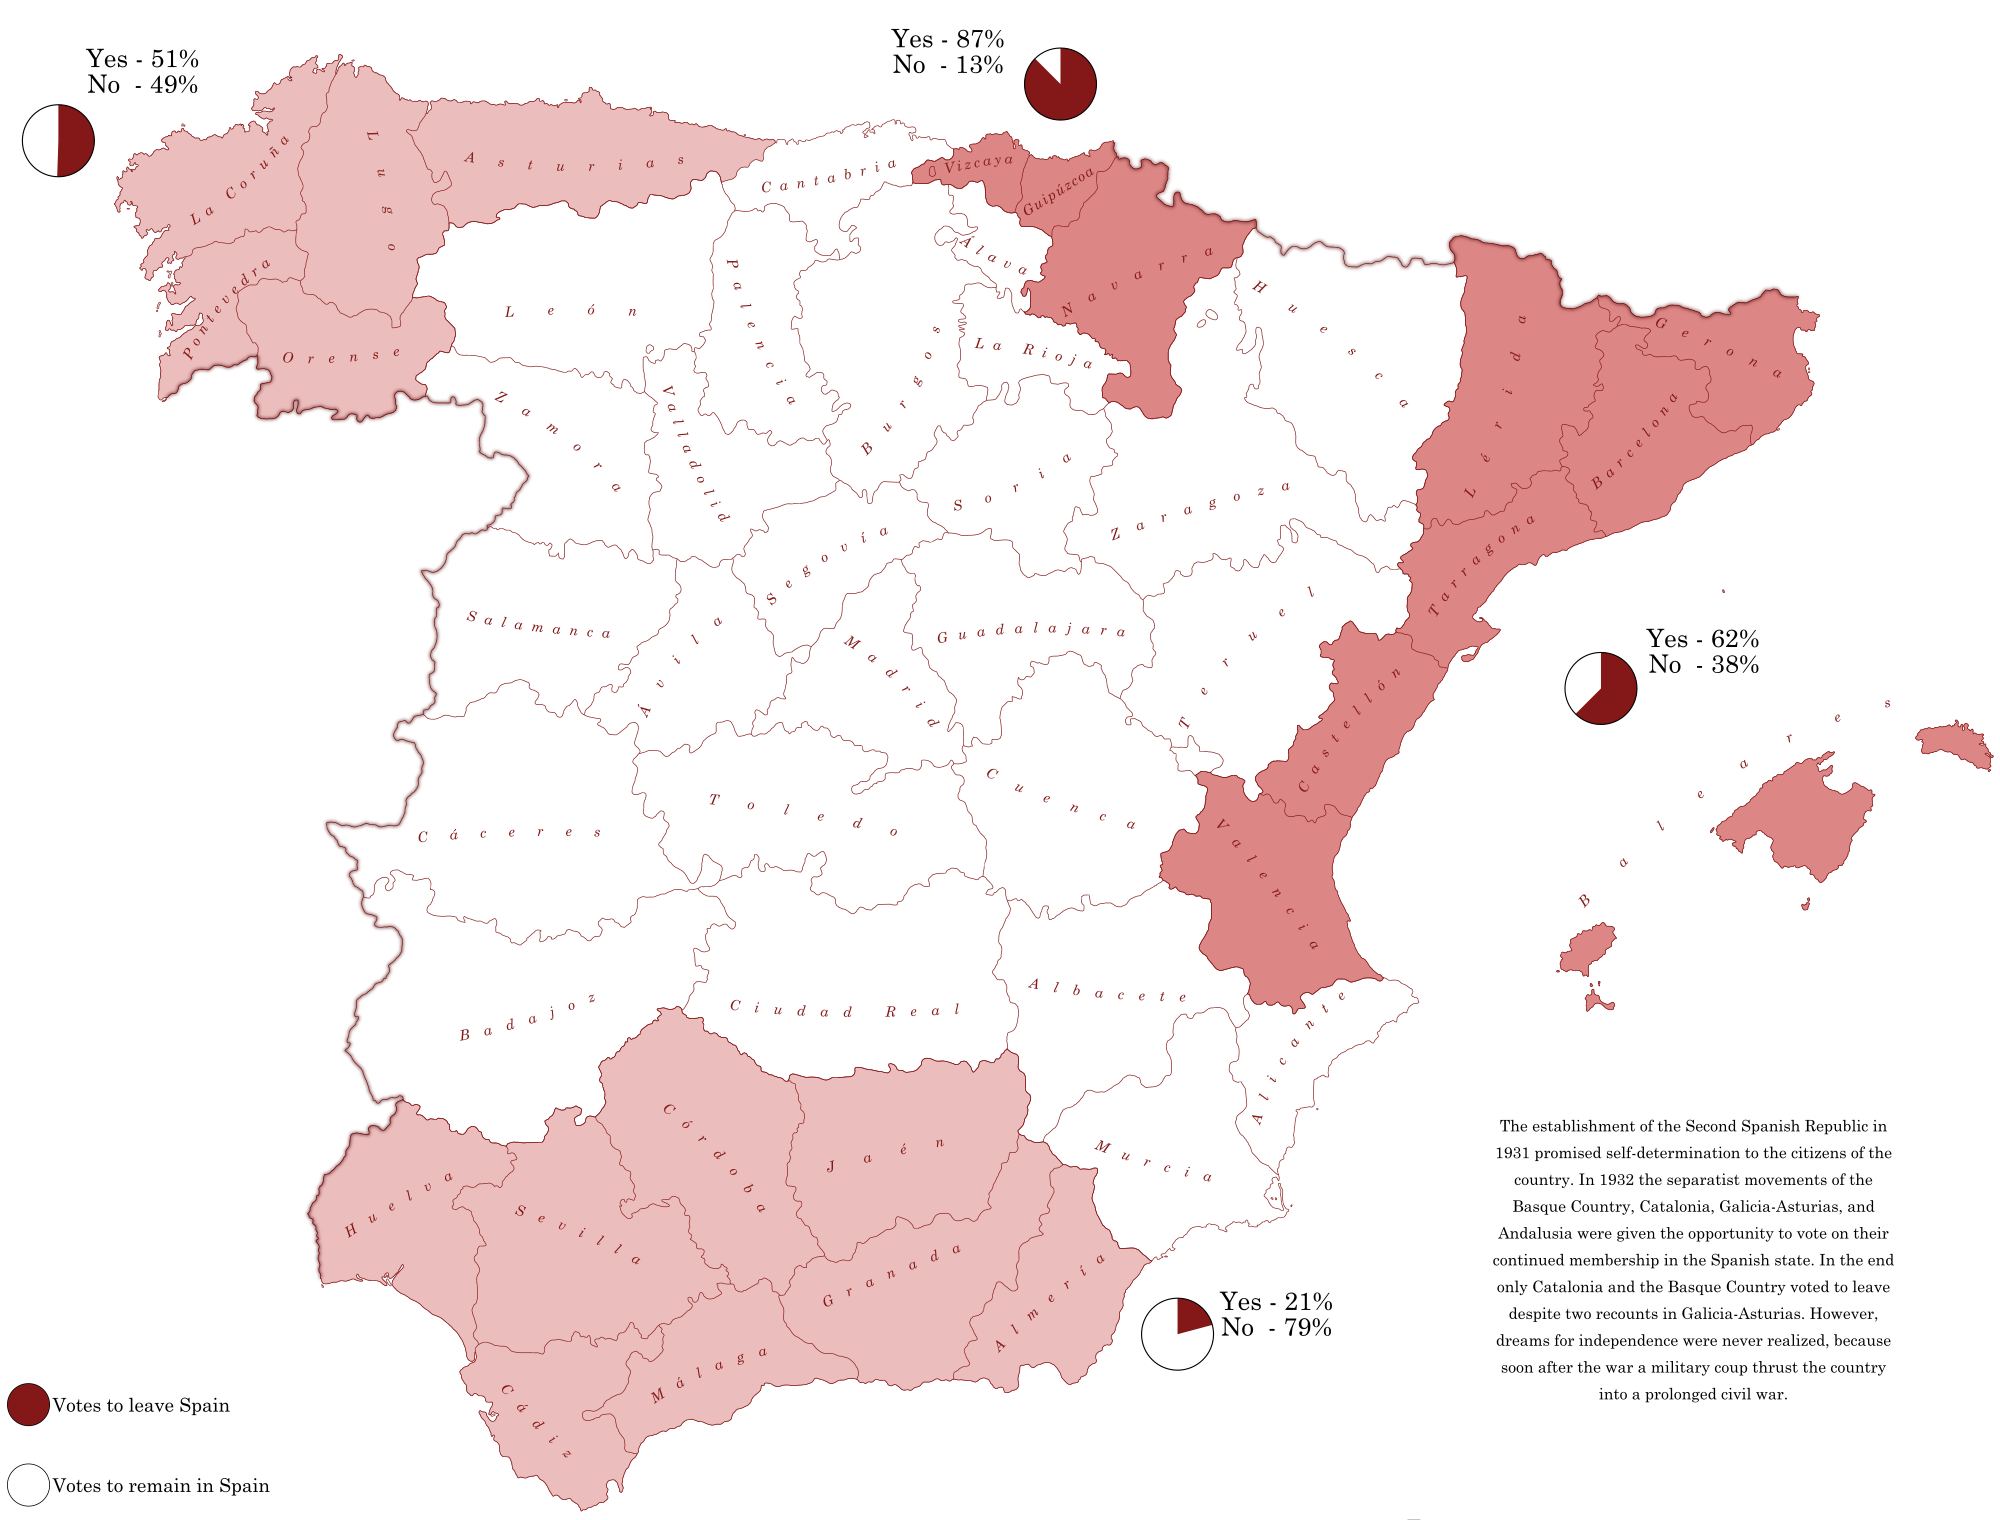 the_spanish_question___1932_by_xotaed-dcjv2p7.png